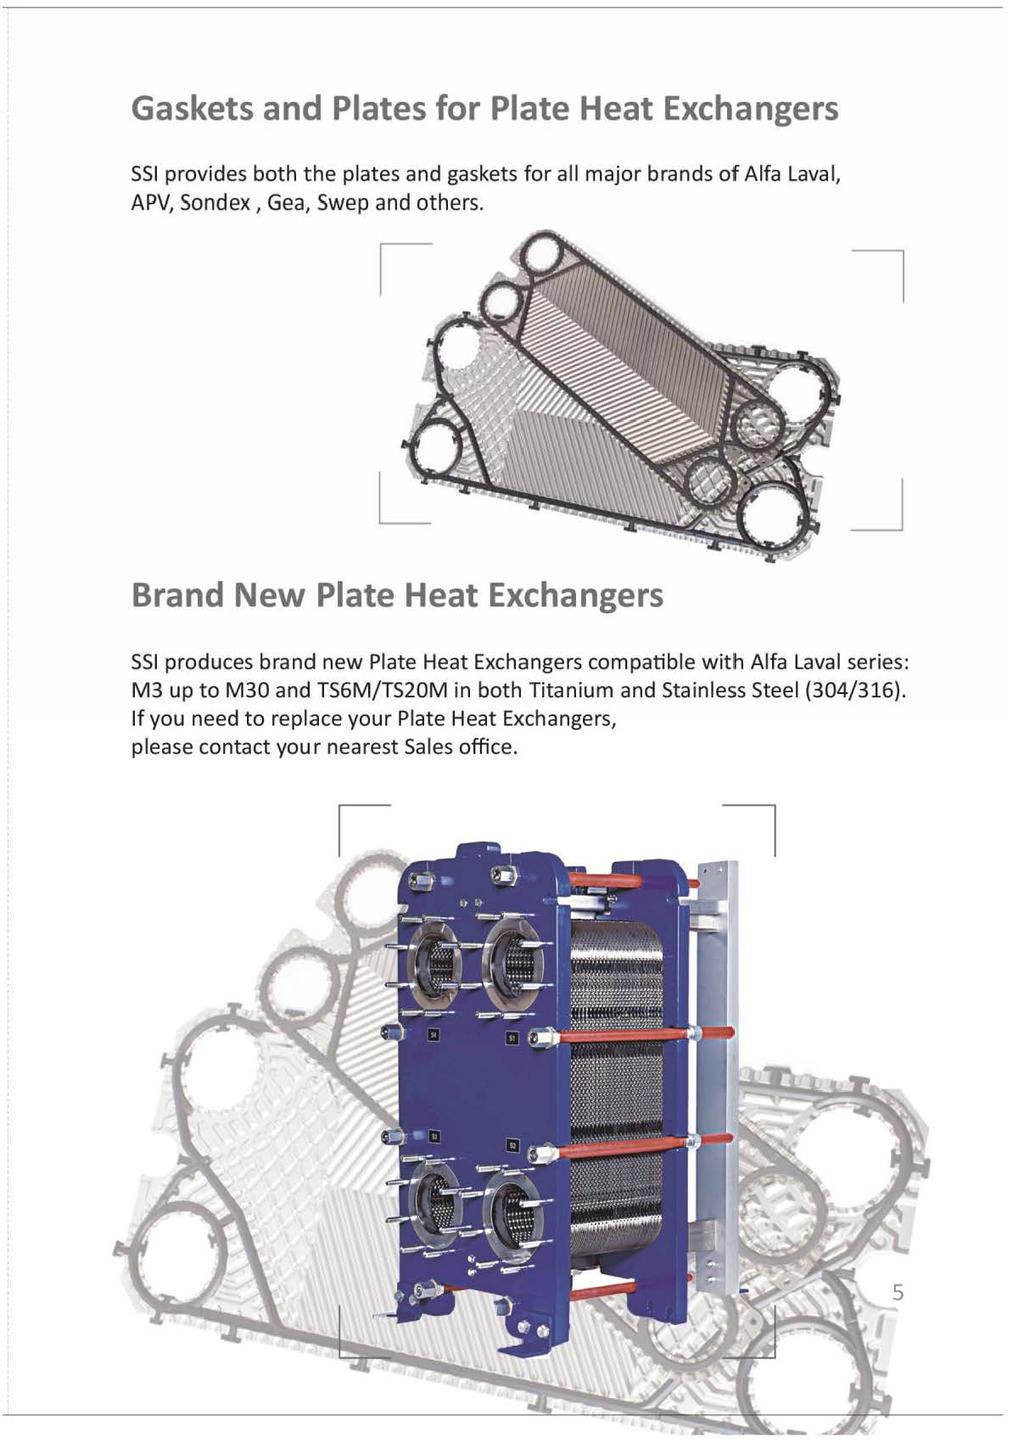 Gaskets and Plates for Plate Heat Exchangers SSI provides both the plates and gaskets for all major brands of Alta Laval, APV, Sondex, Gea, Swep and others.